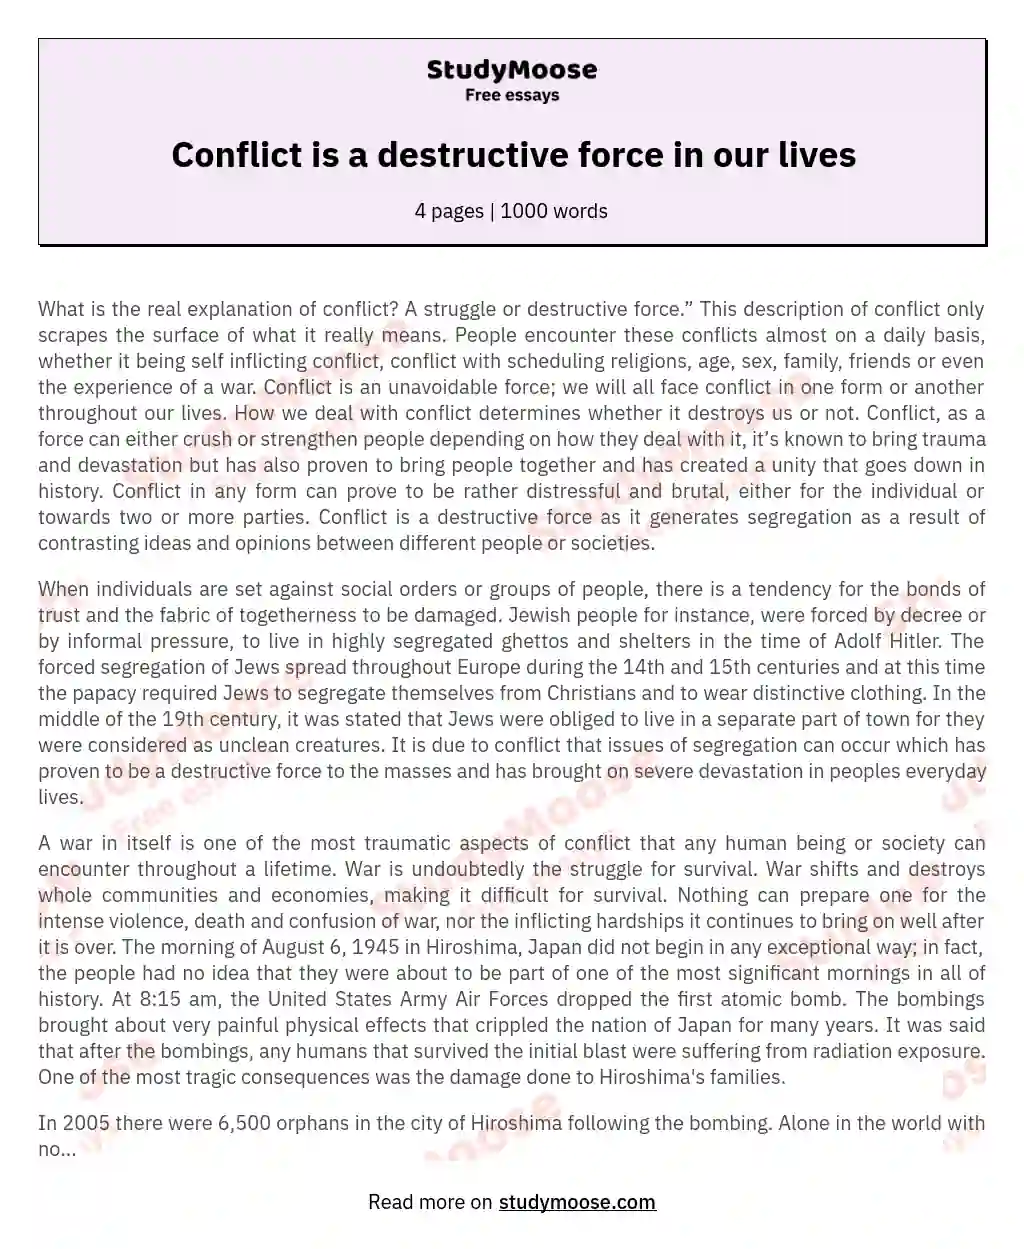 Conflict is a destructive force in our lives essay